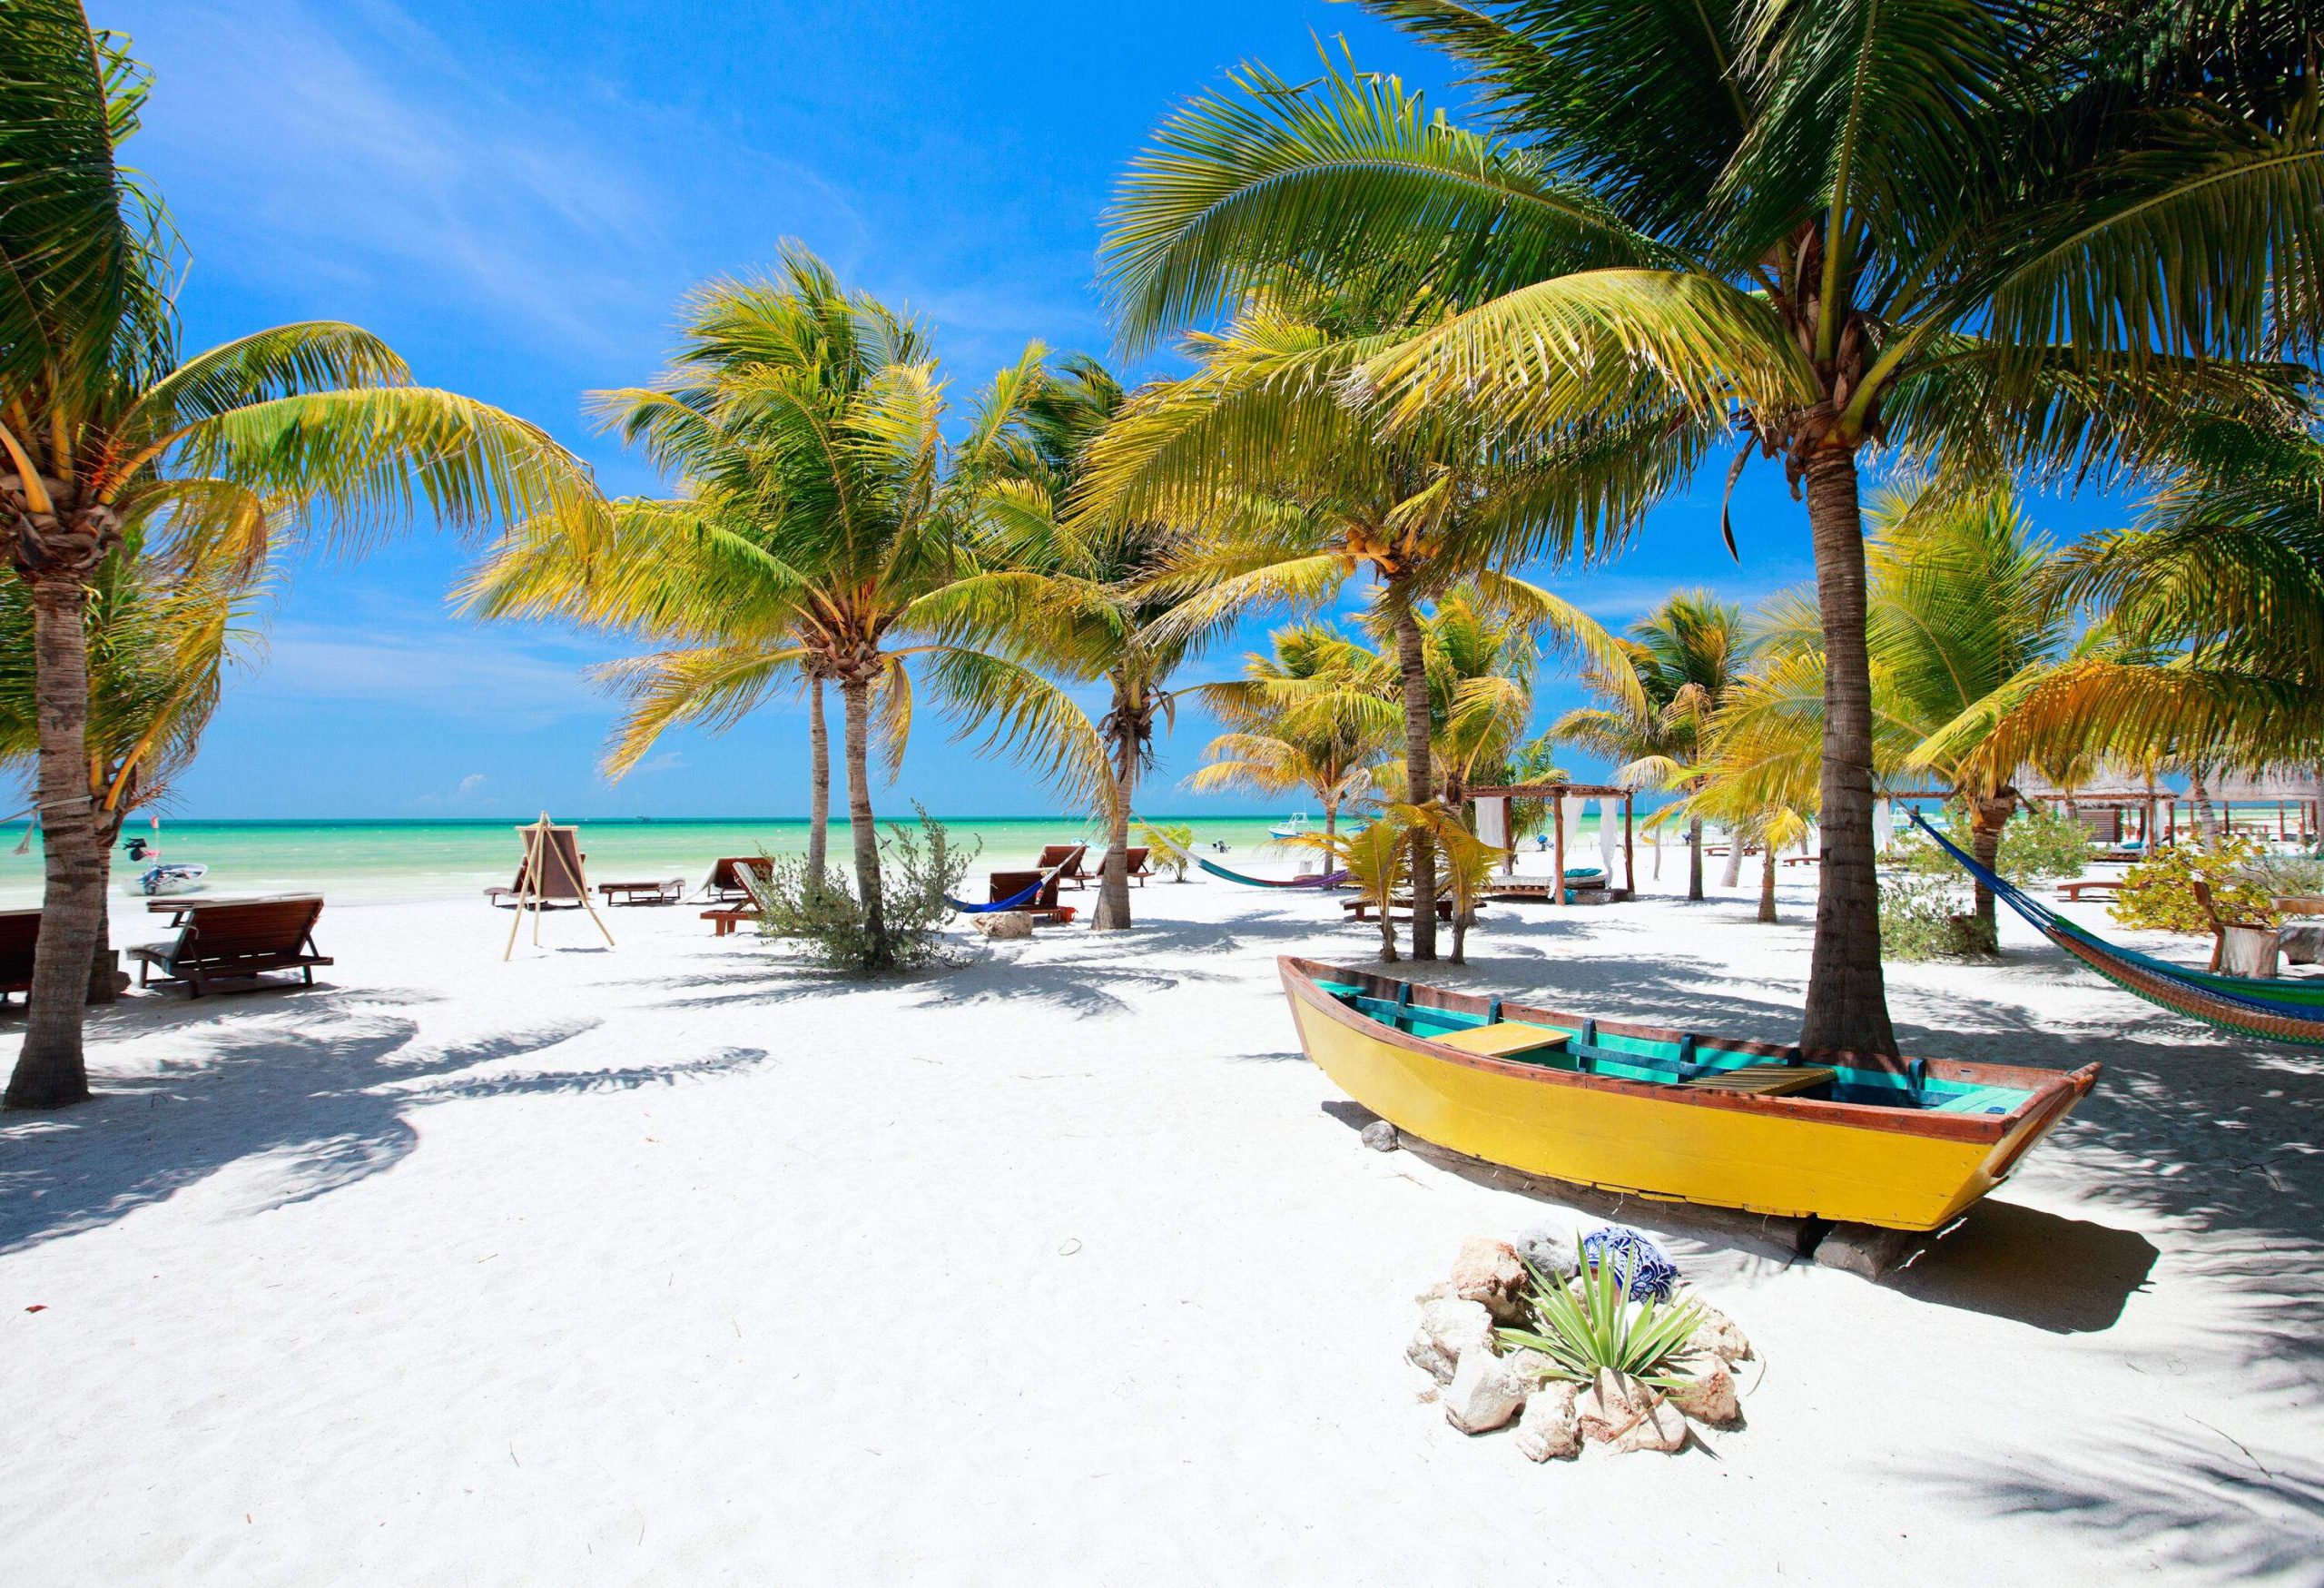 A relaxing white sand beach with scattered beach beds and hammocks under the lush palm trees.